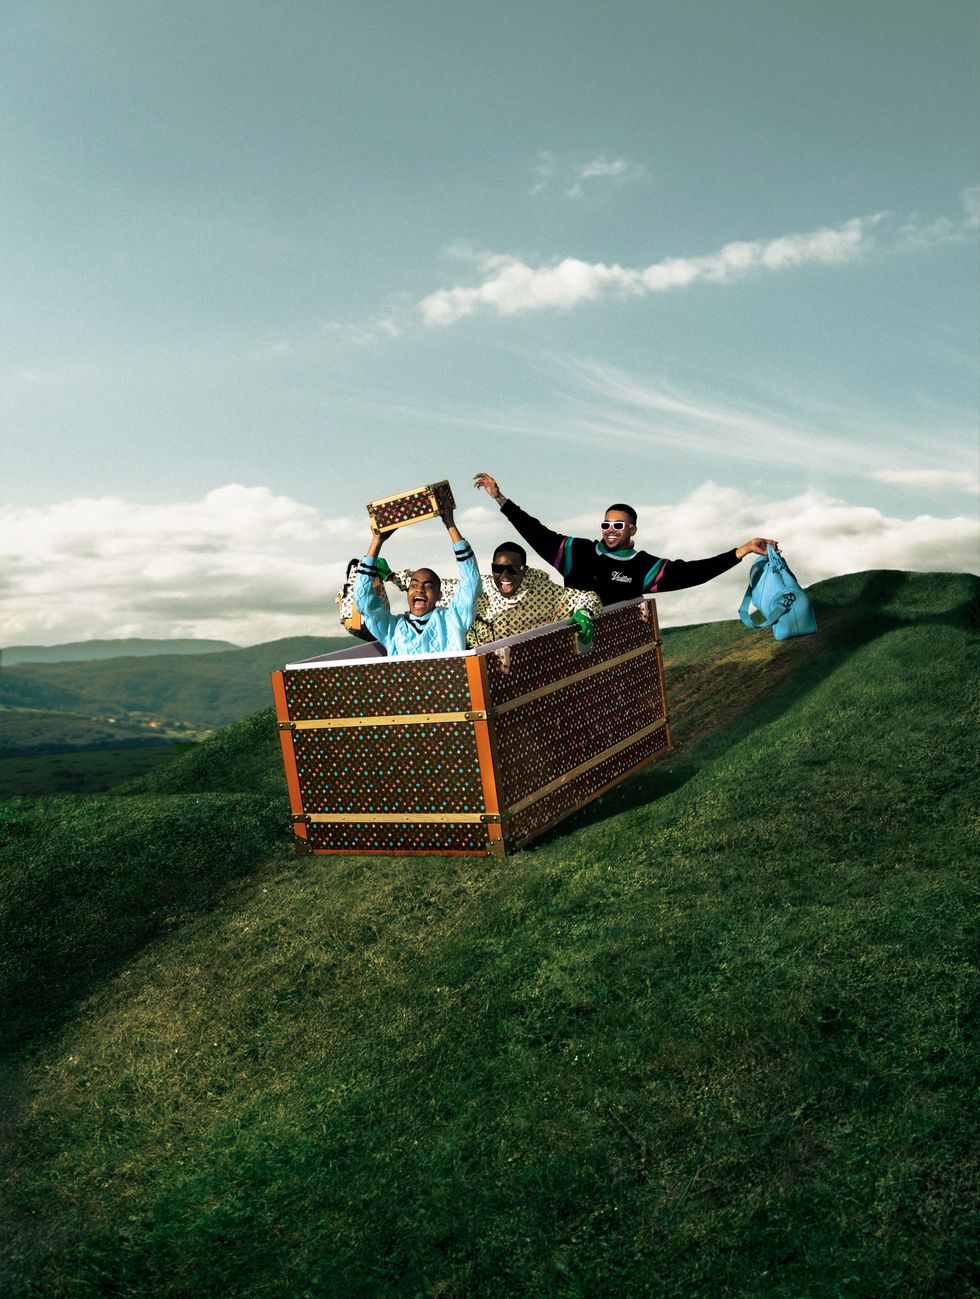 a group of people in a basket on a grassy hill